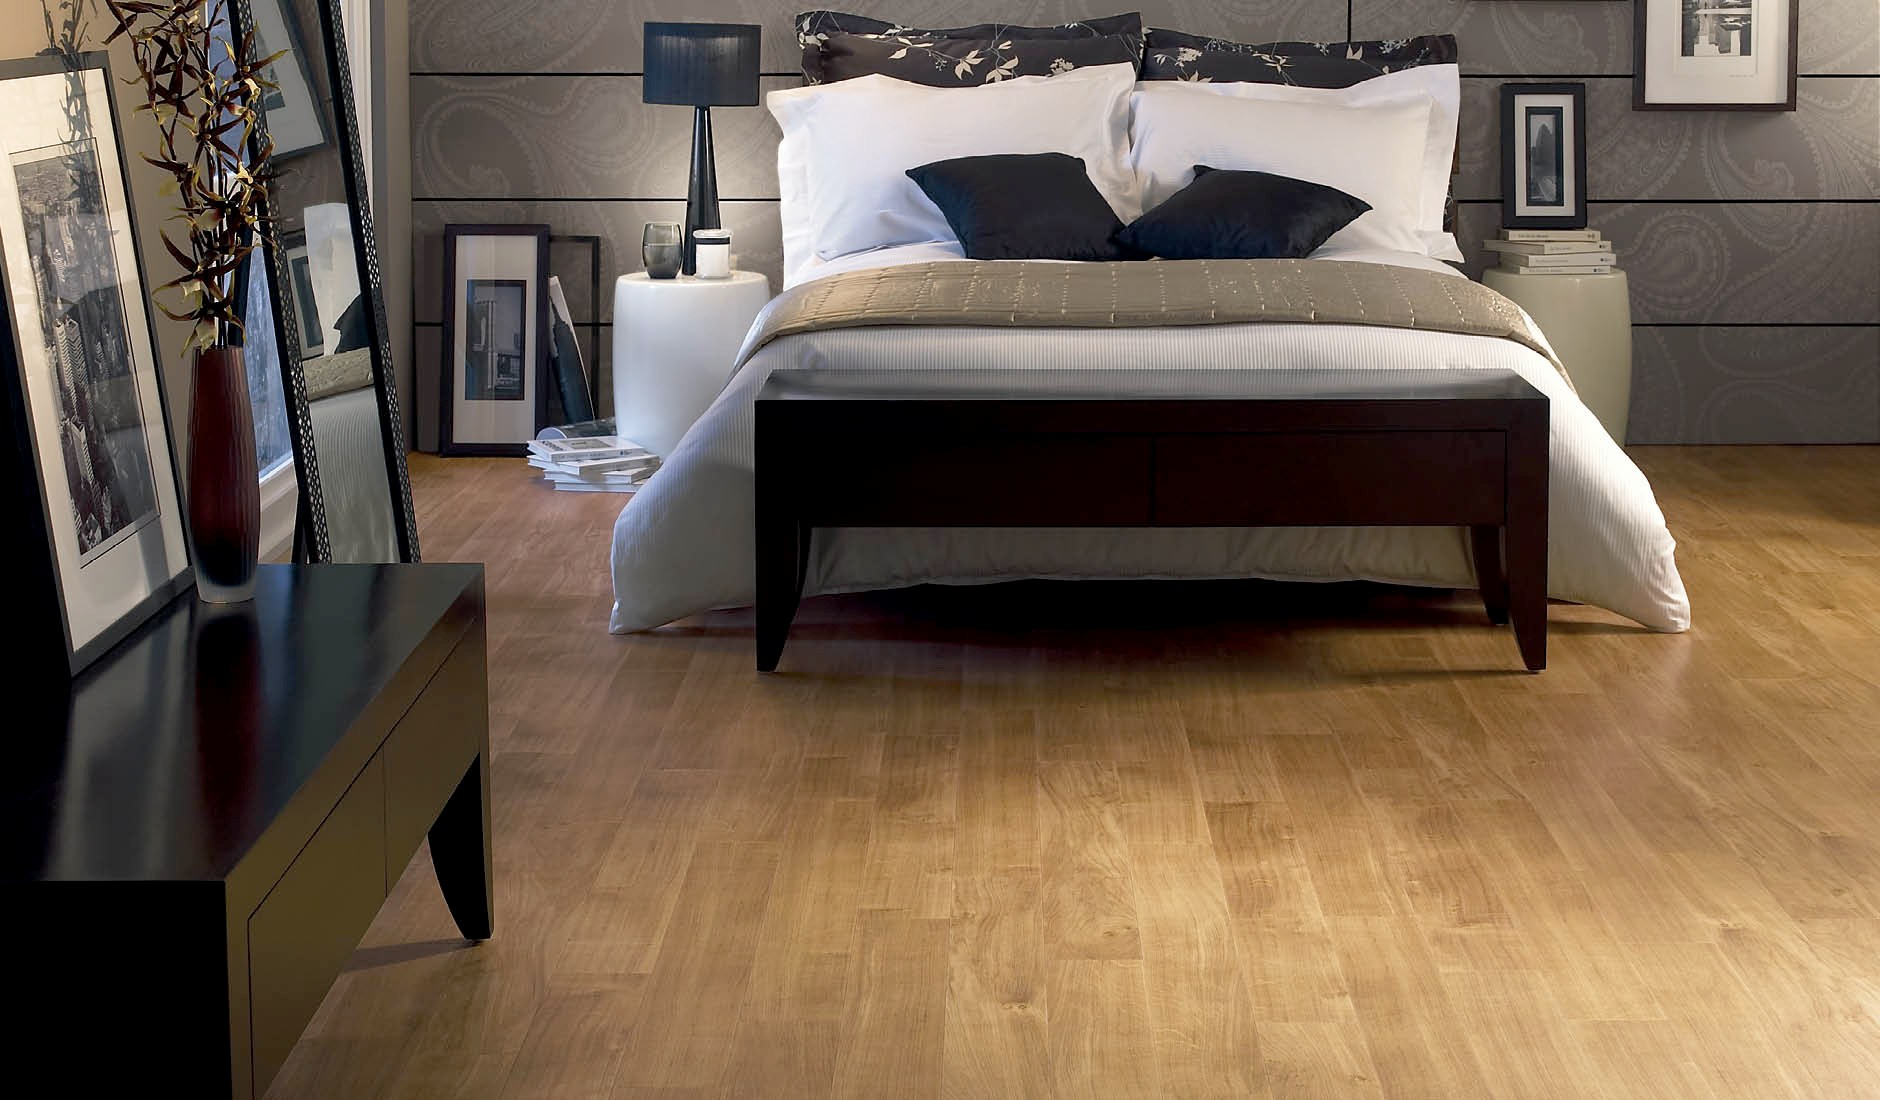 Decorating Bedroom With Wood Floors